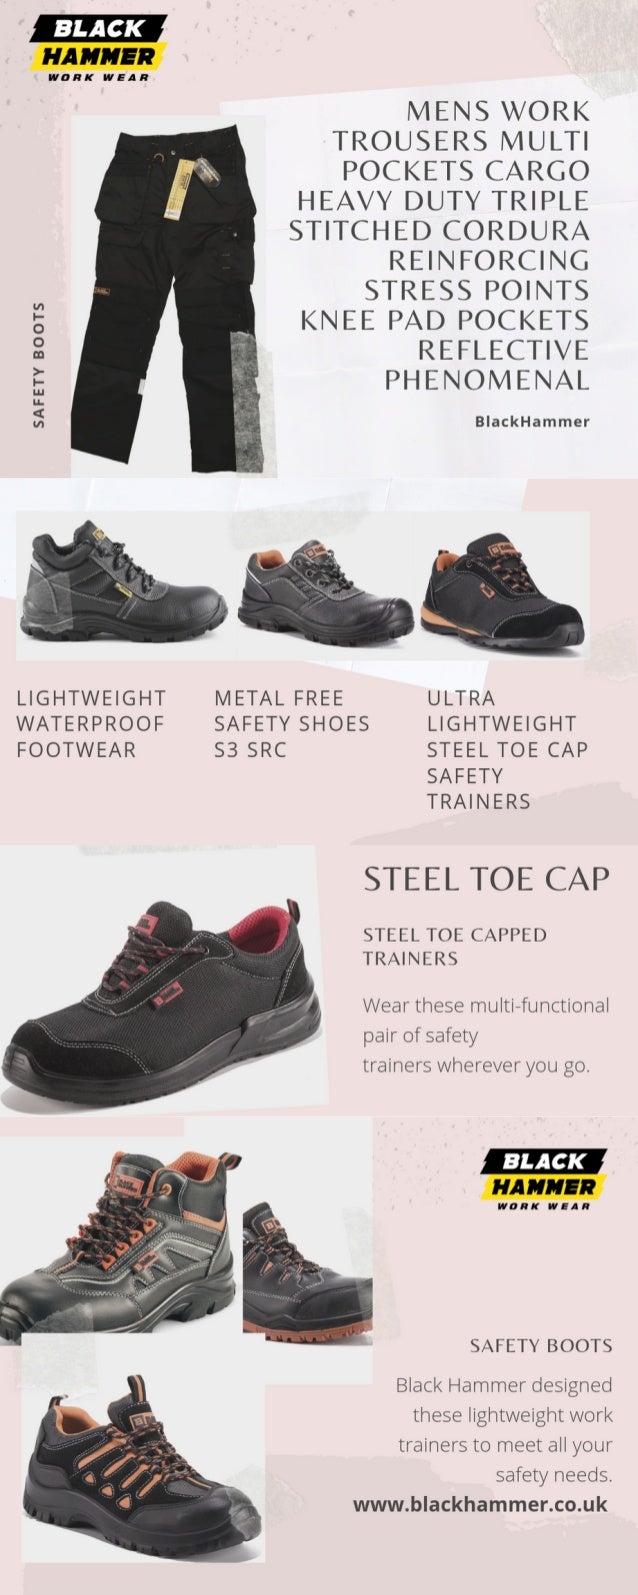 BlackHammer Safety Boots | Safety Trainers